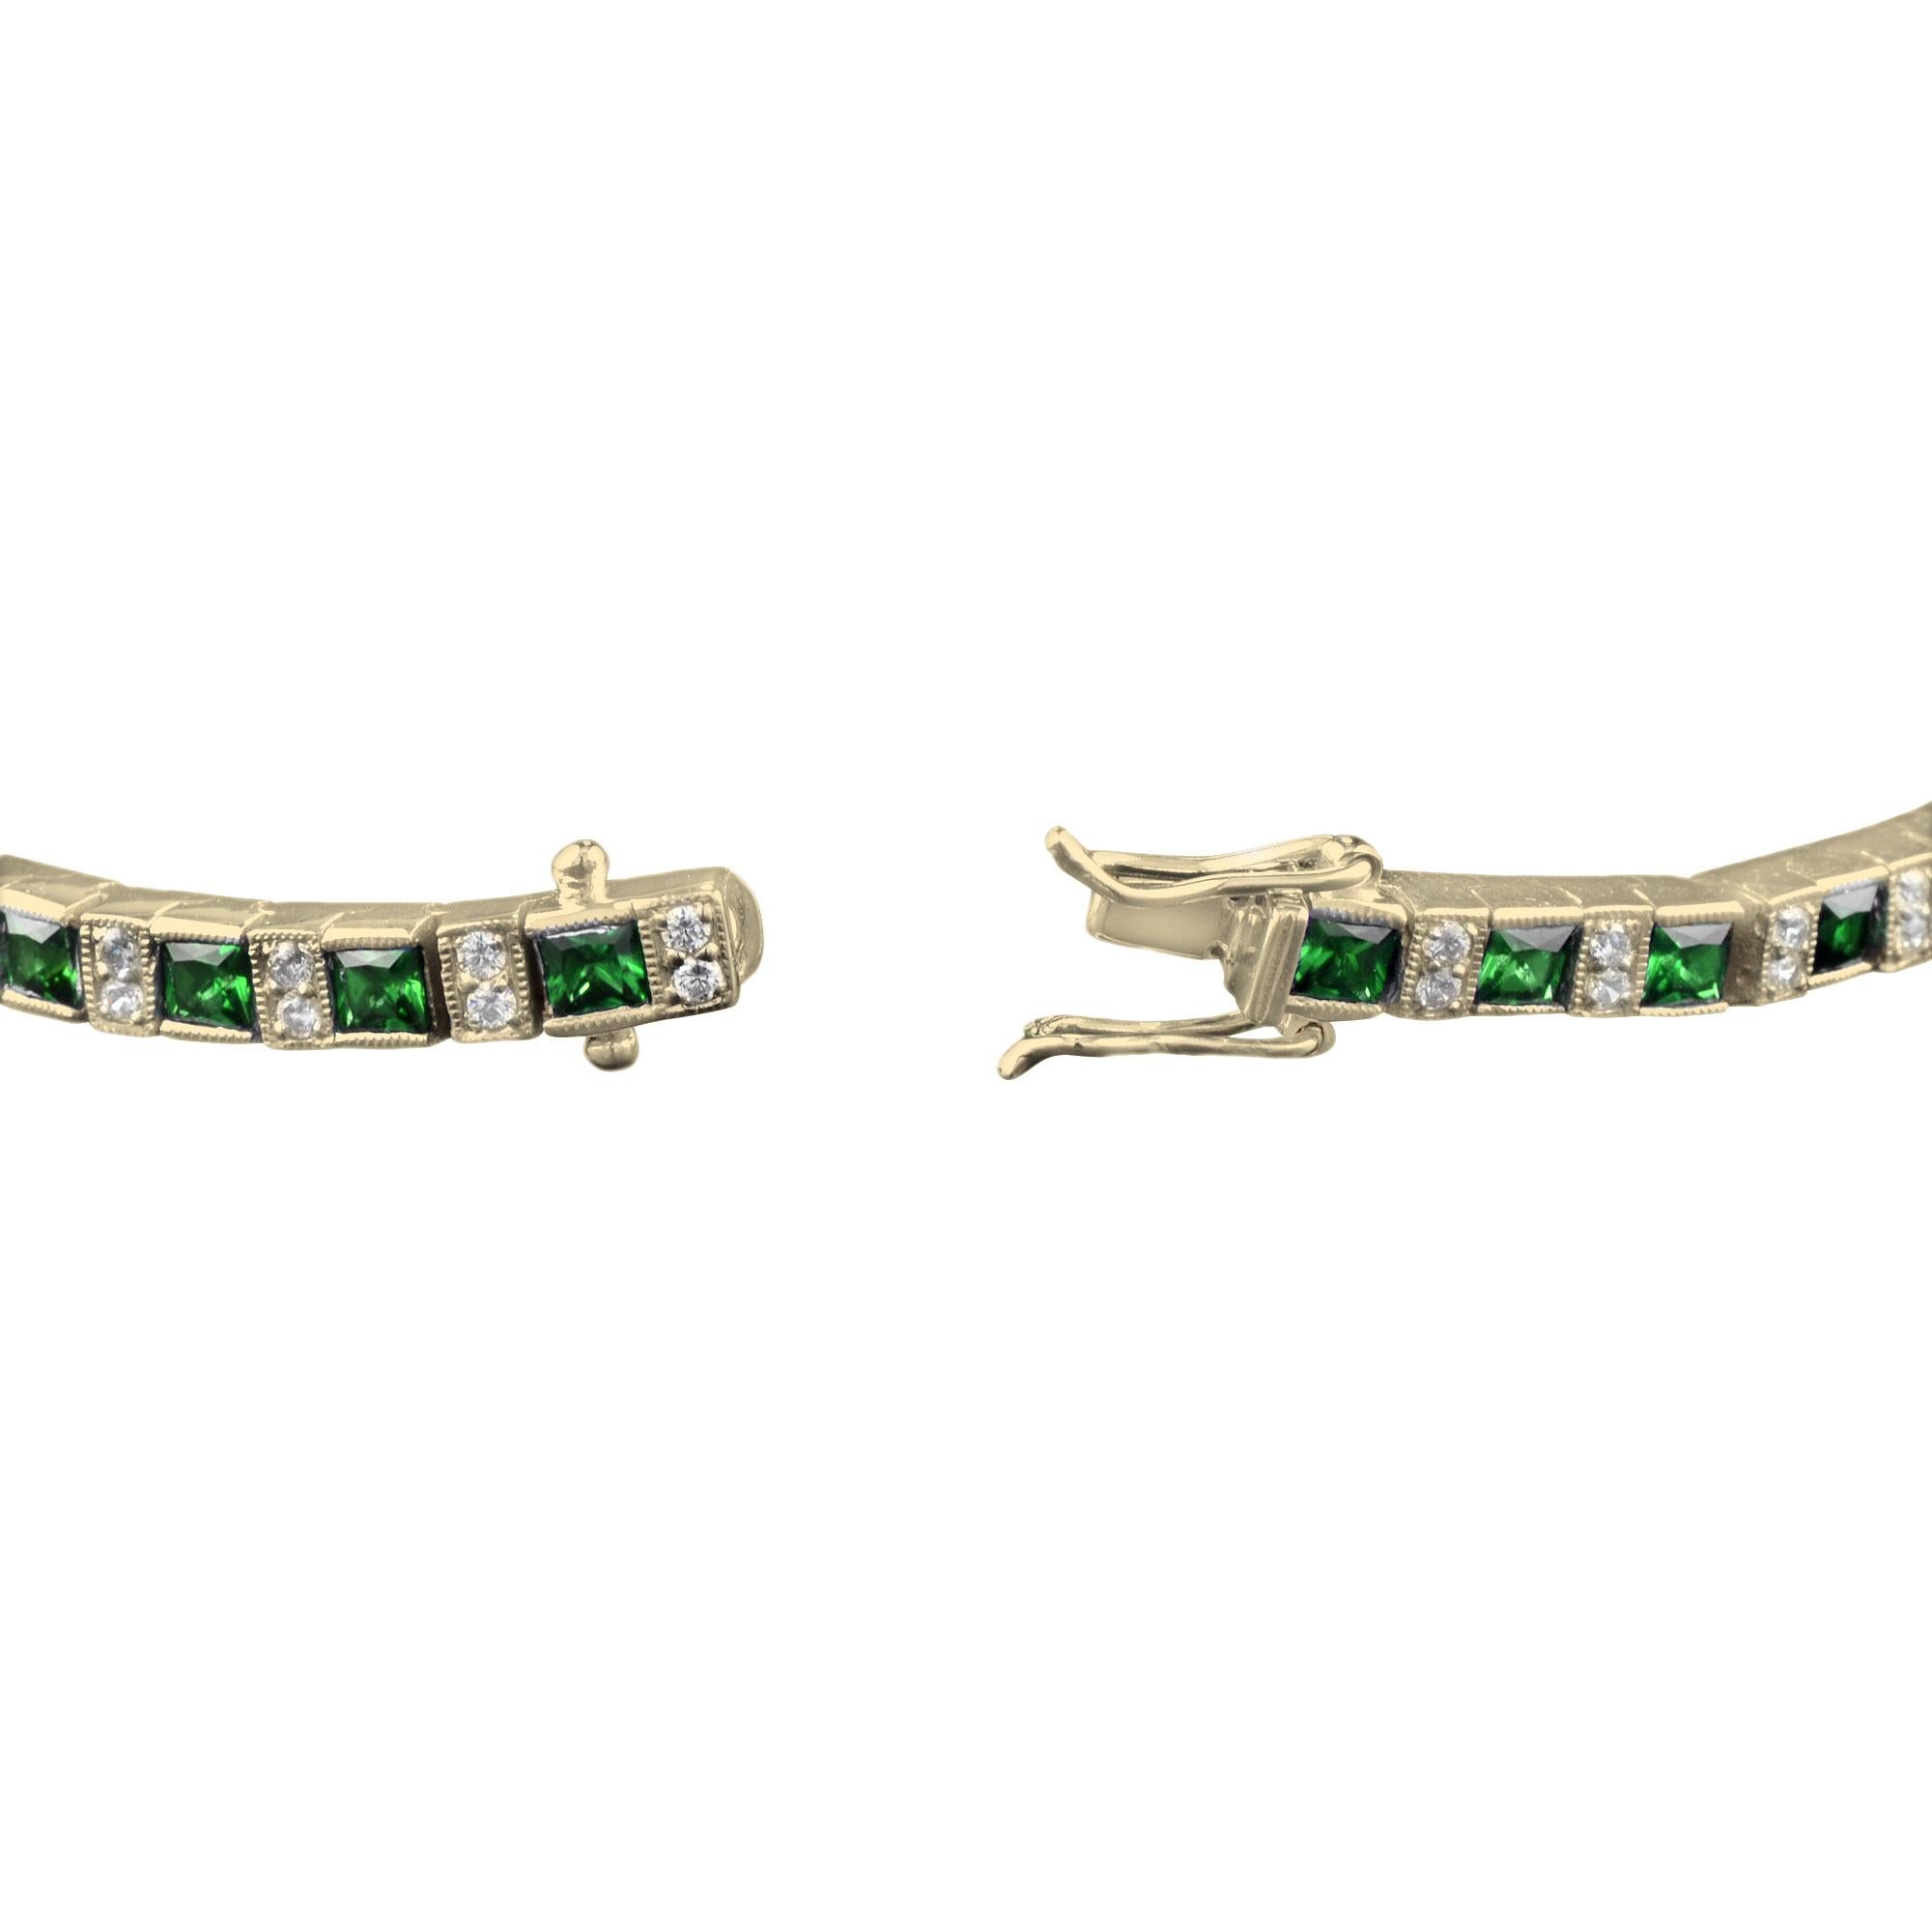 Women's Art Deco Style Alternated Square Emerald and Diamond Bracelet in 14K Yellow Gold For Sale